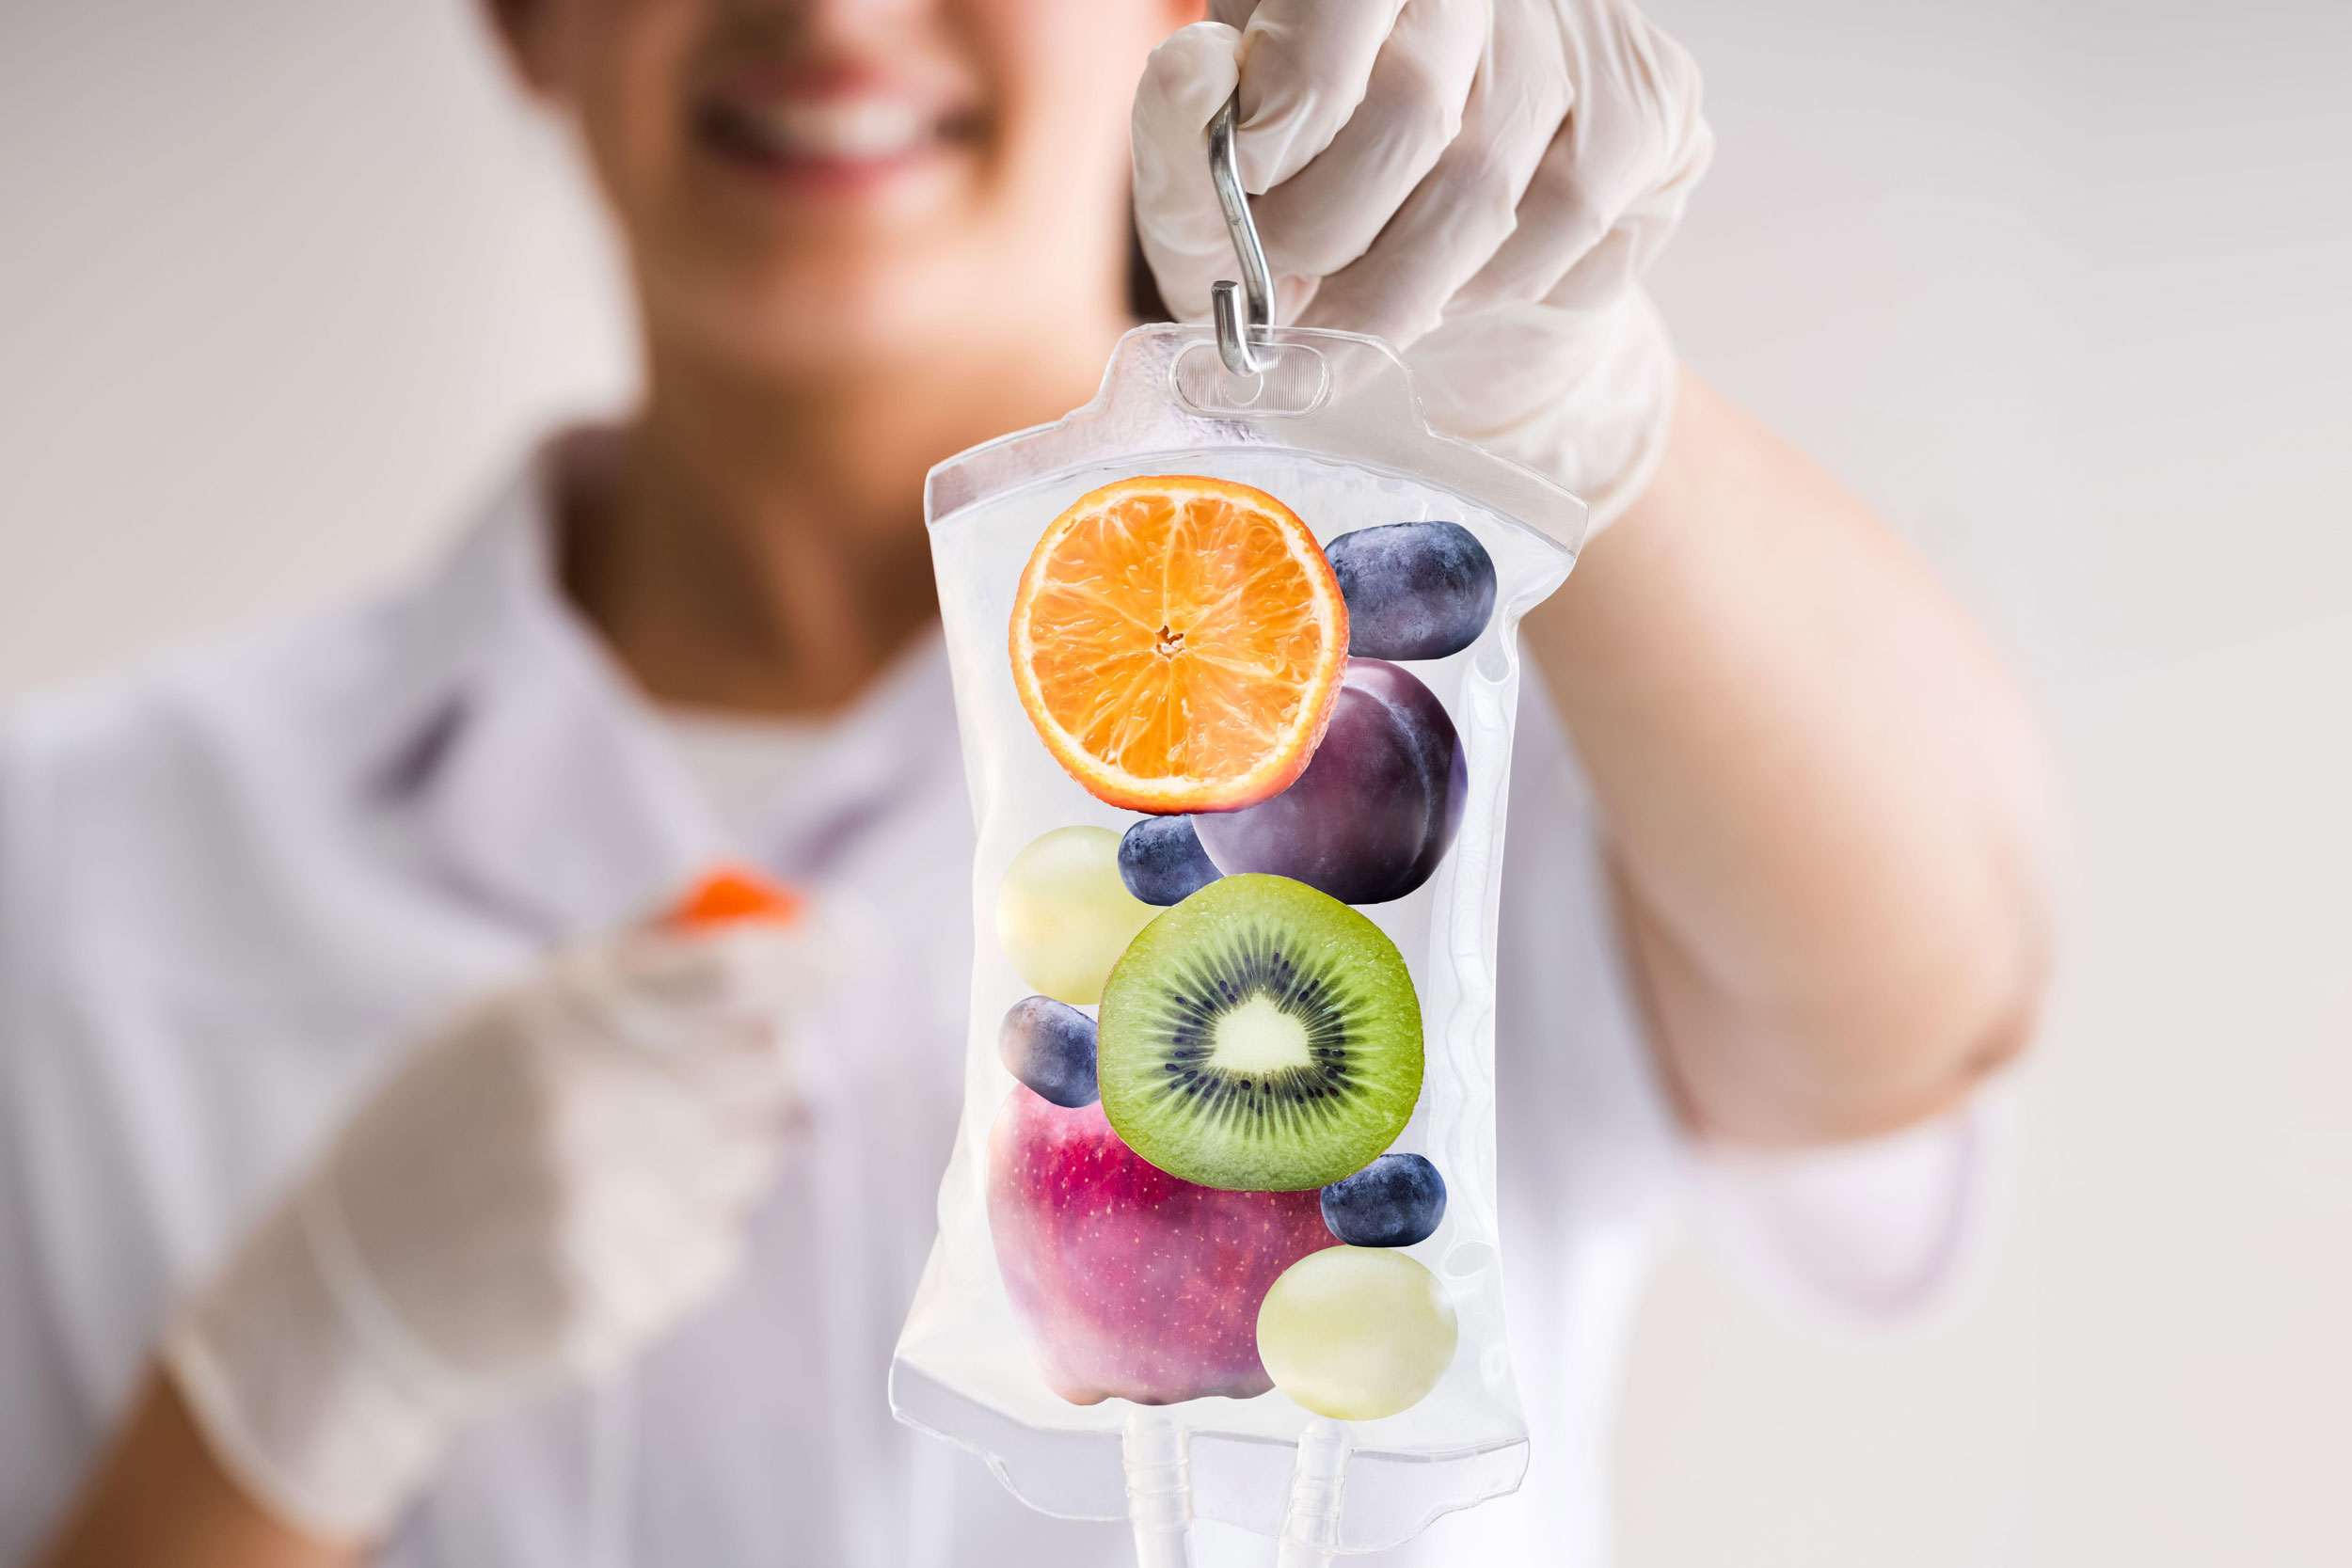 You may benefit from receiving vitamin infusions for your health